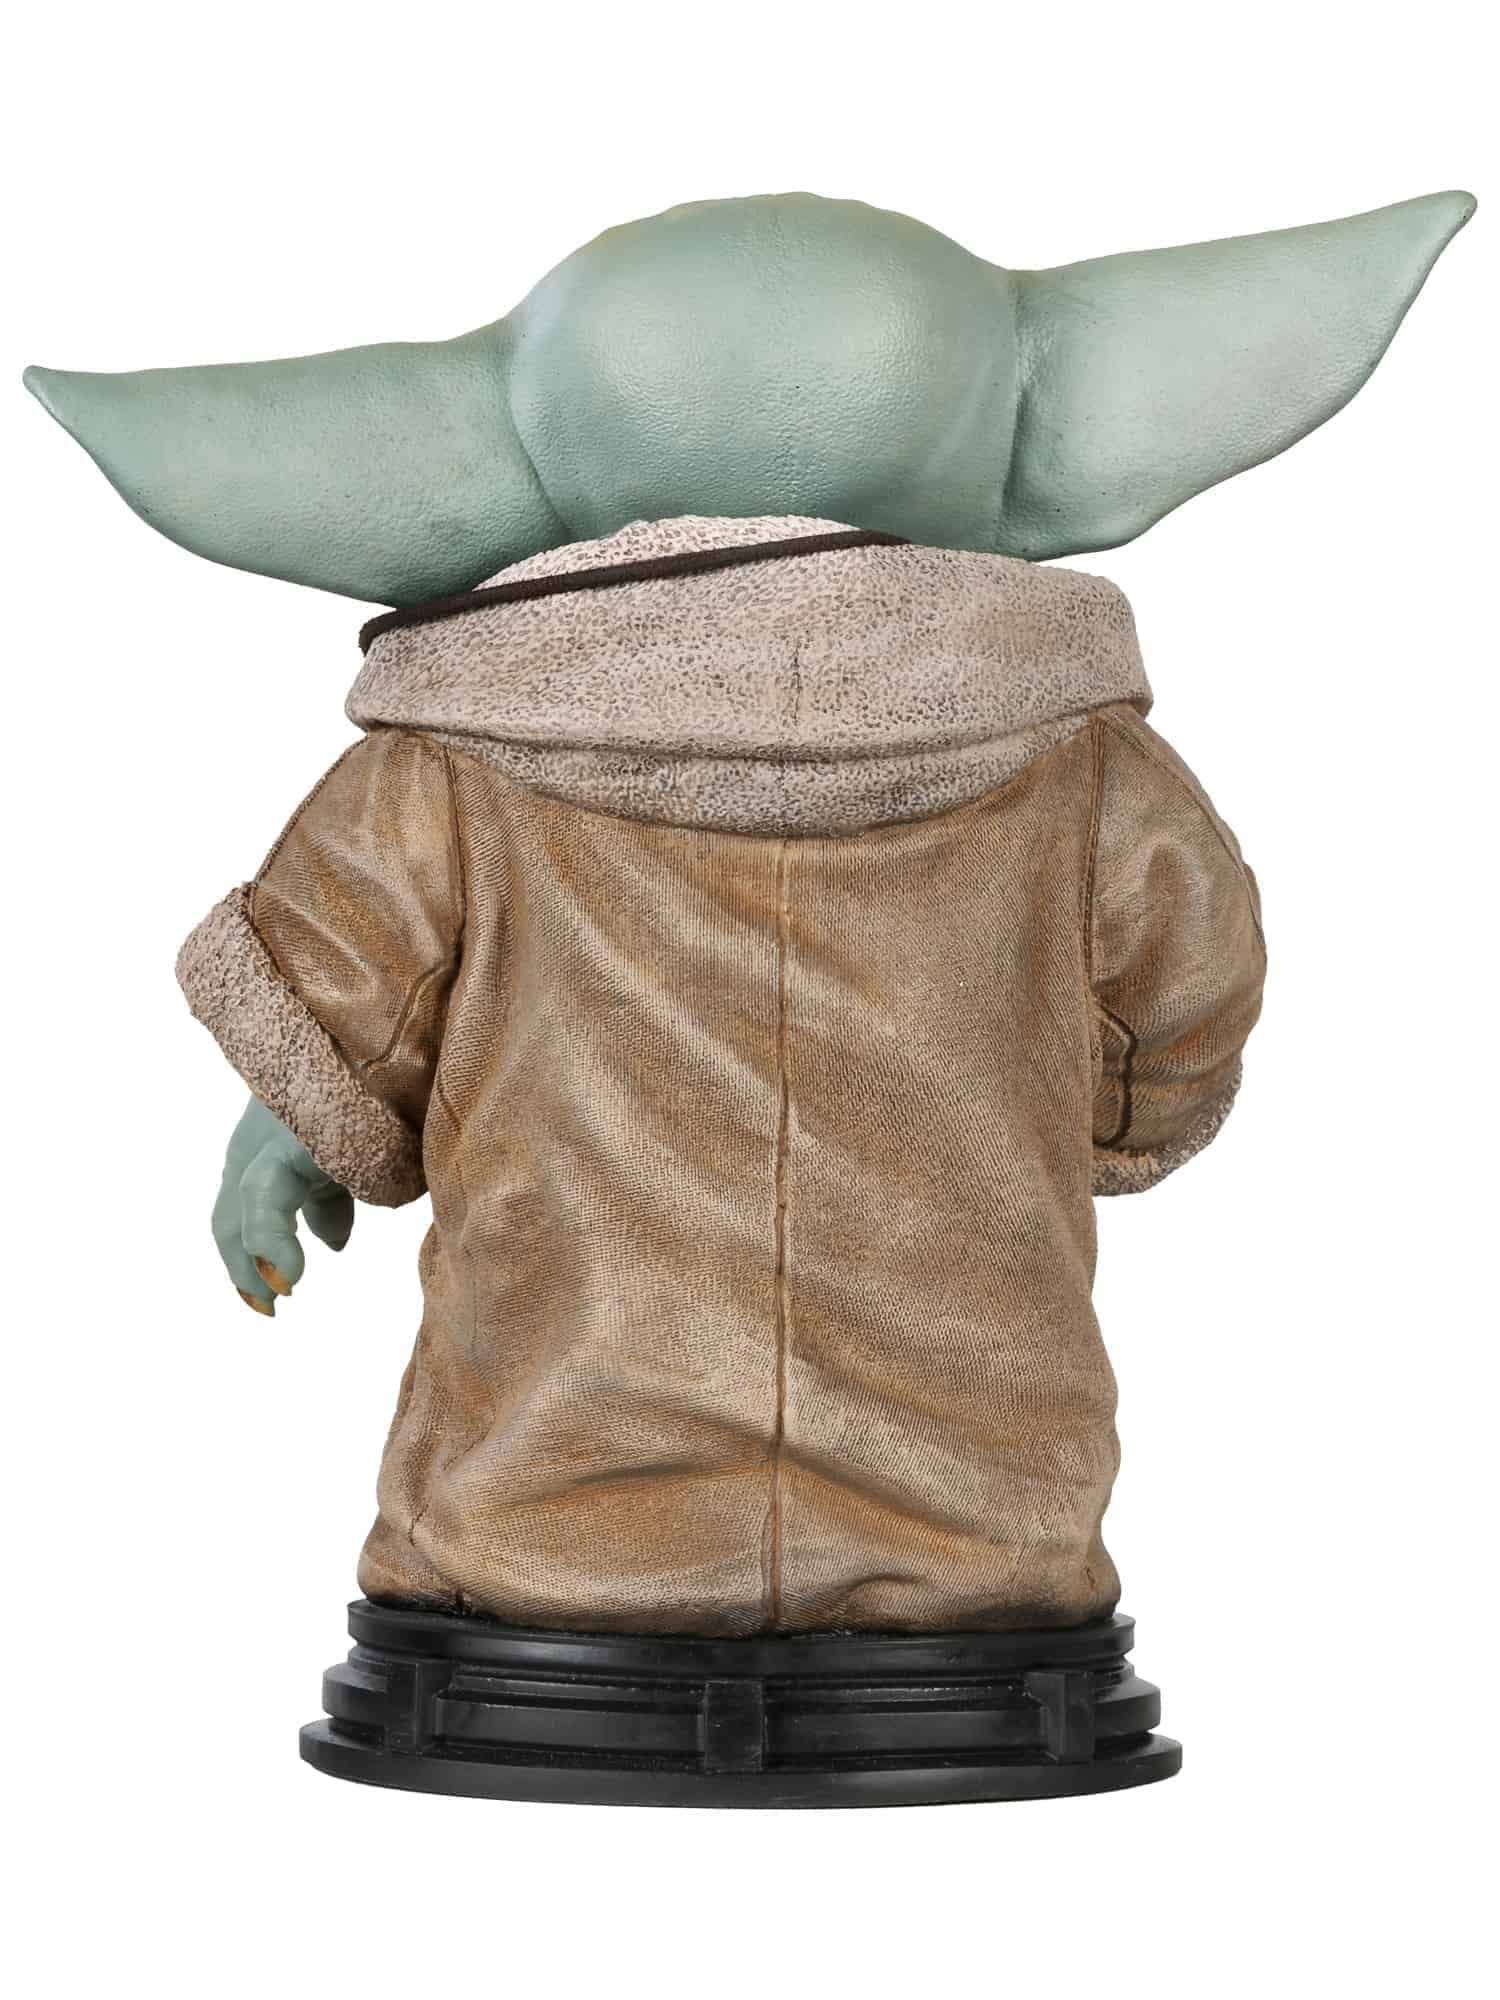 Star Wars and Denuo Novo bring the collectible killer goods 20